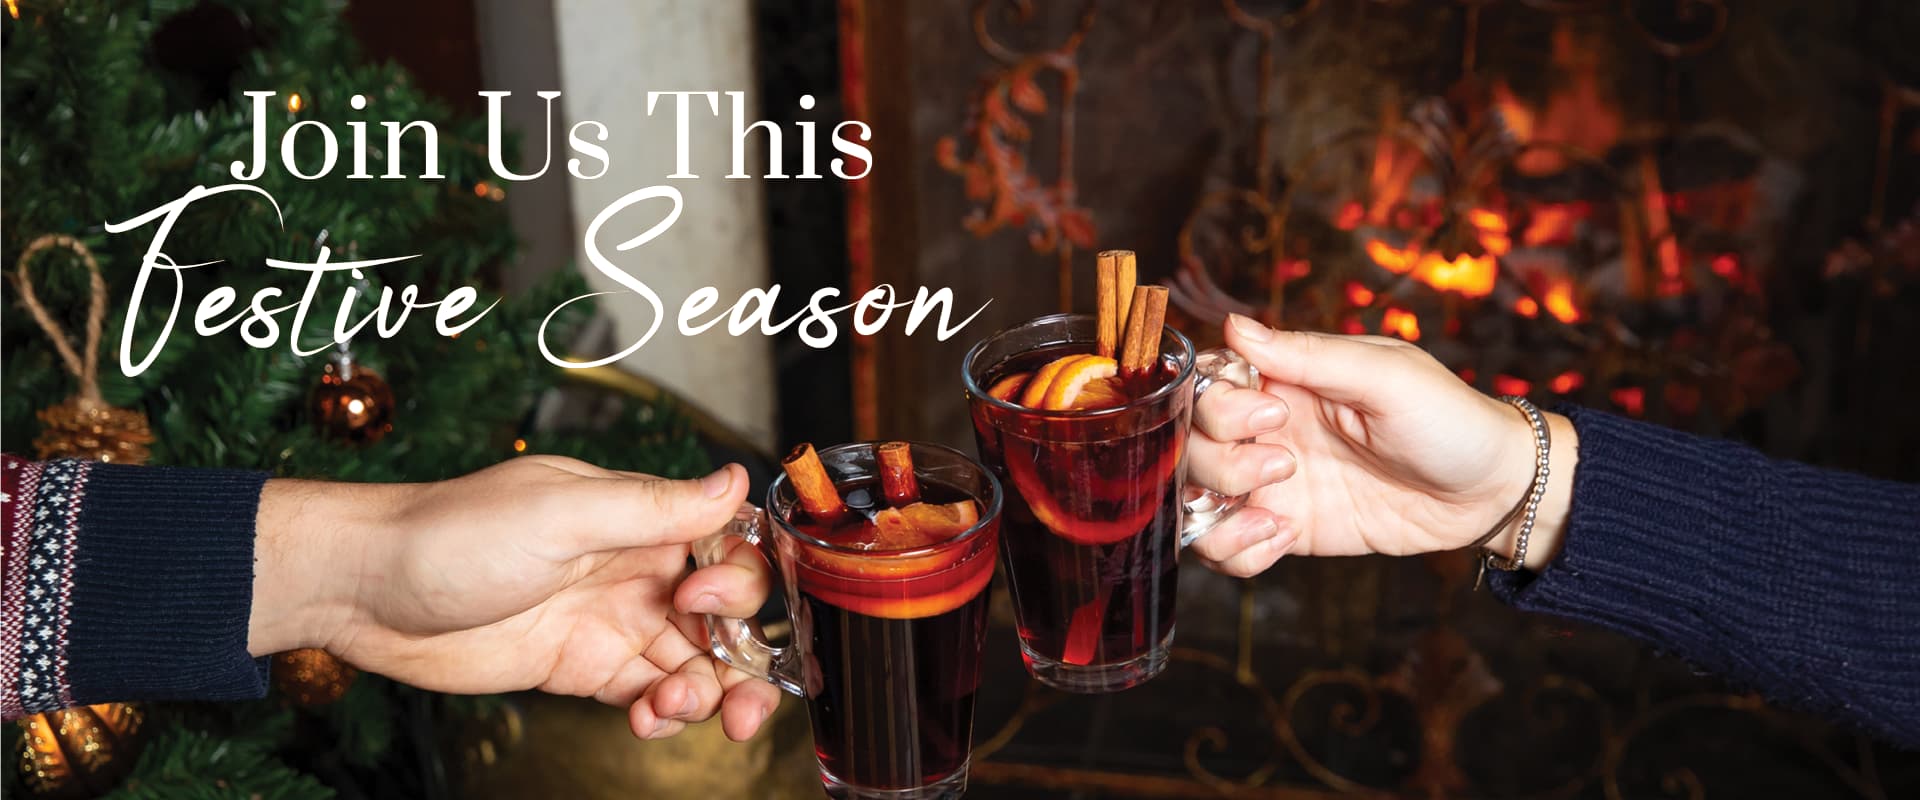 join us this festive season at Ferry Boat | Mulled Wine